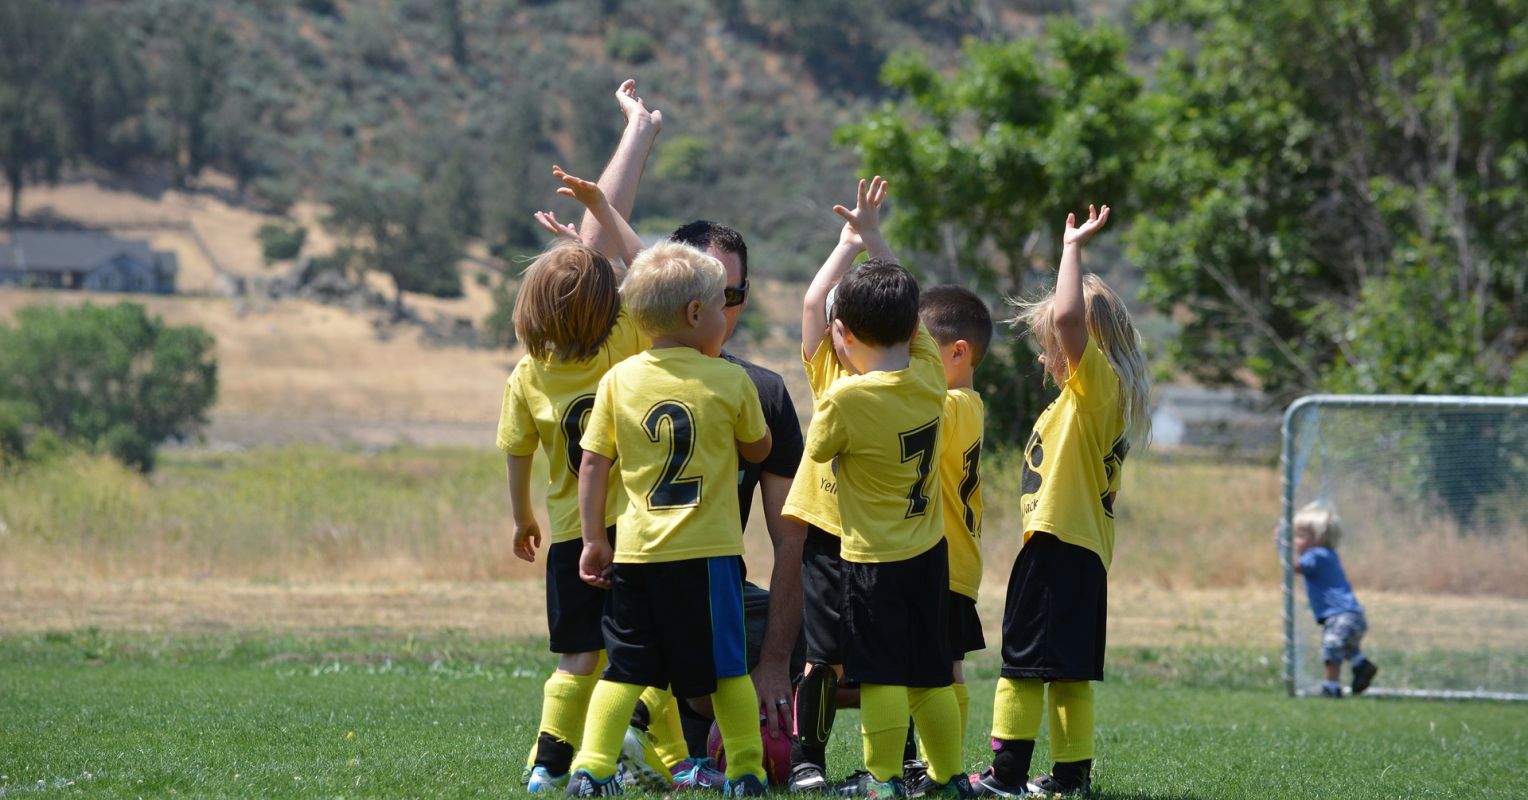 The Case for Removing Competition from Youth Sports